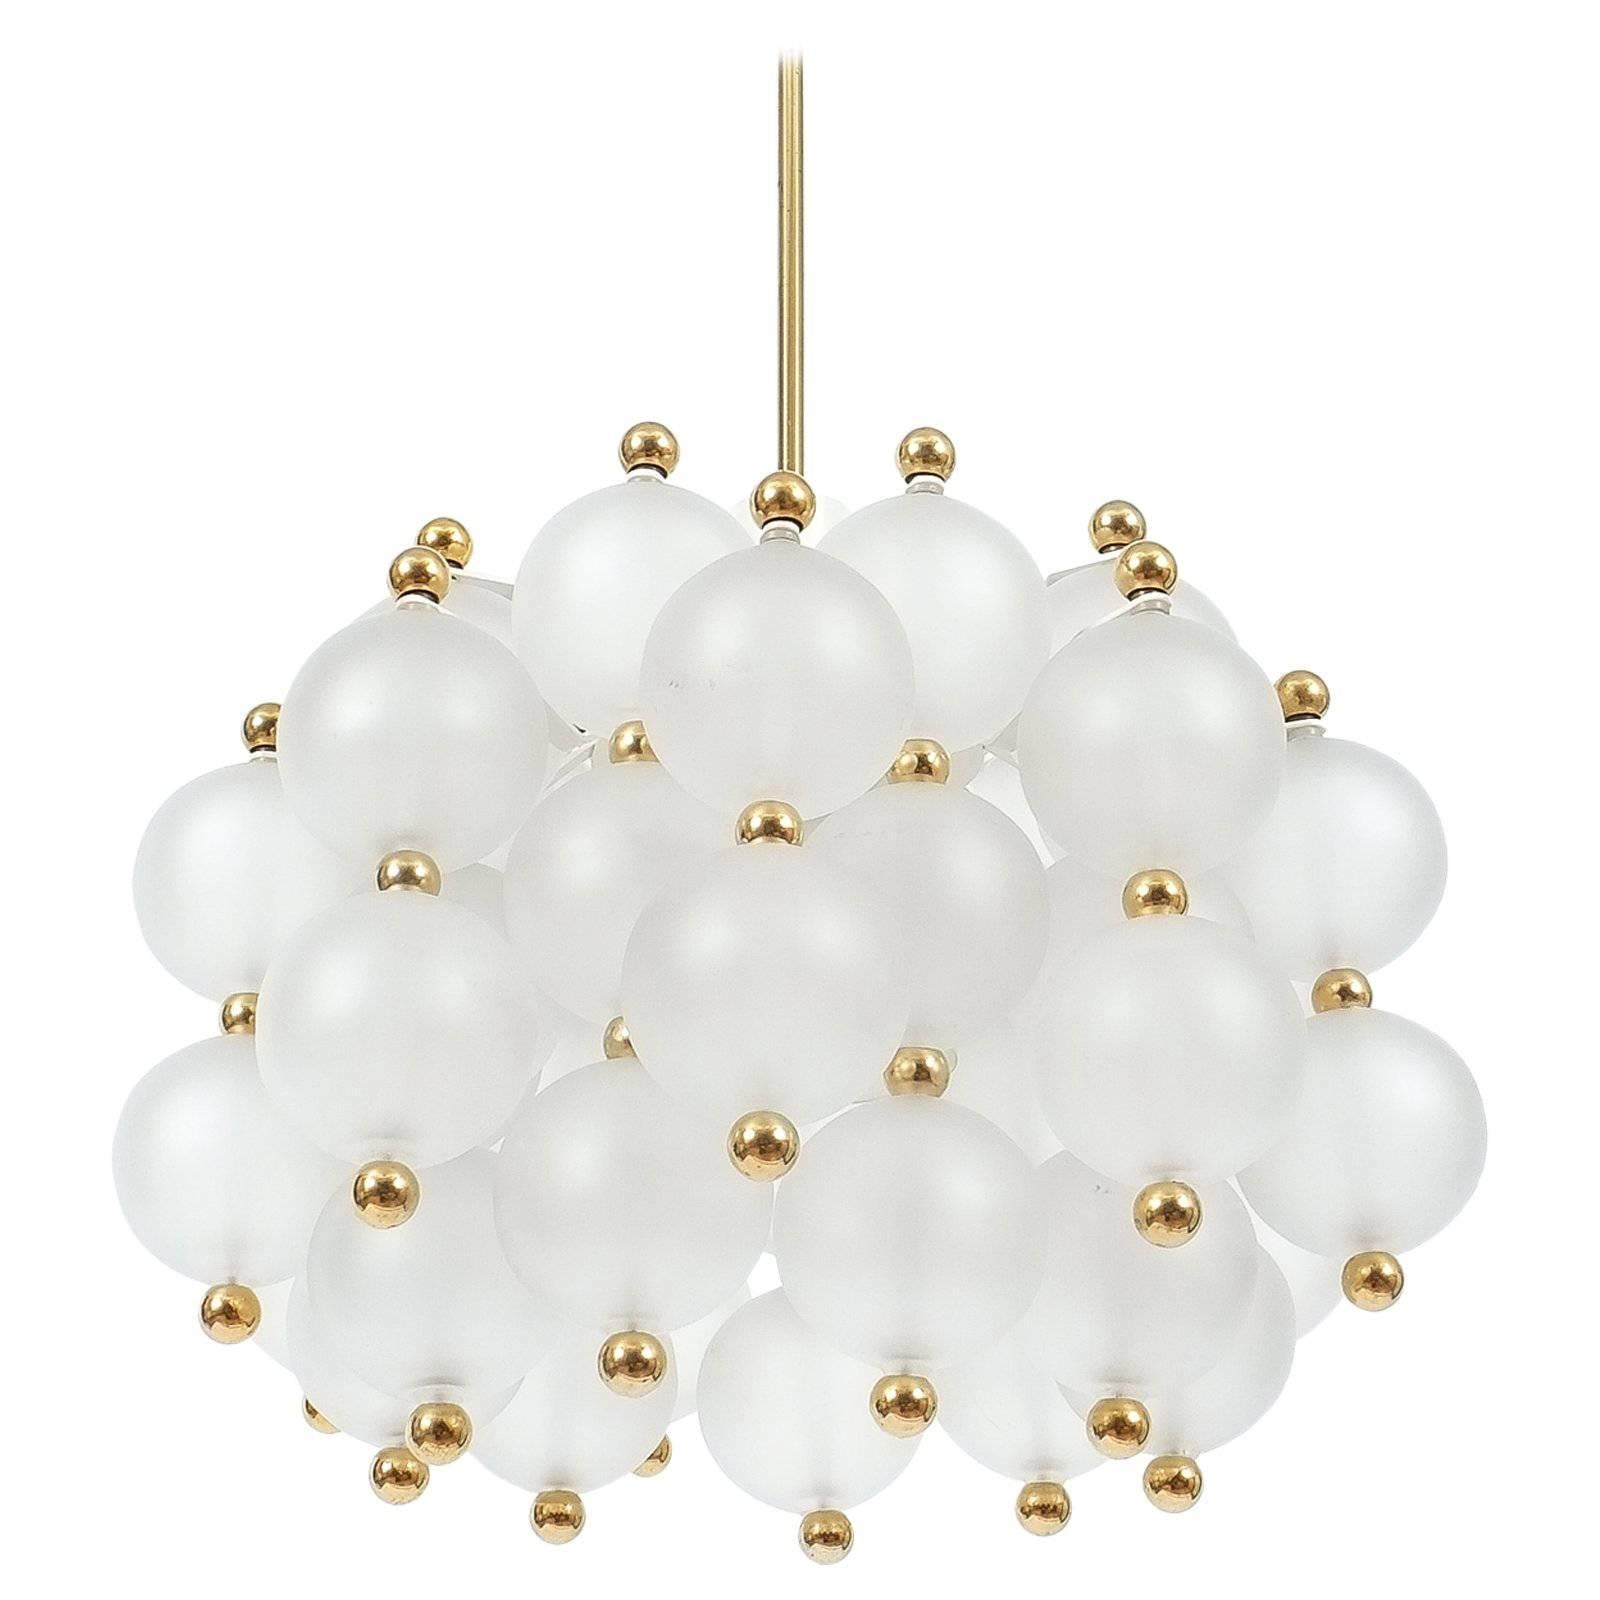 Satin Glass Chandelier Lamp By Kinkeldey With Gold Knobs, circa 1980 For Sale